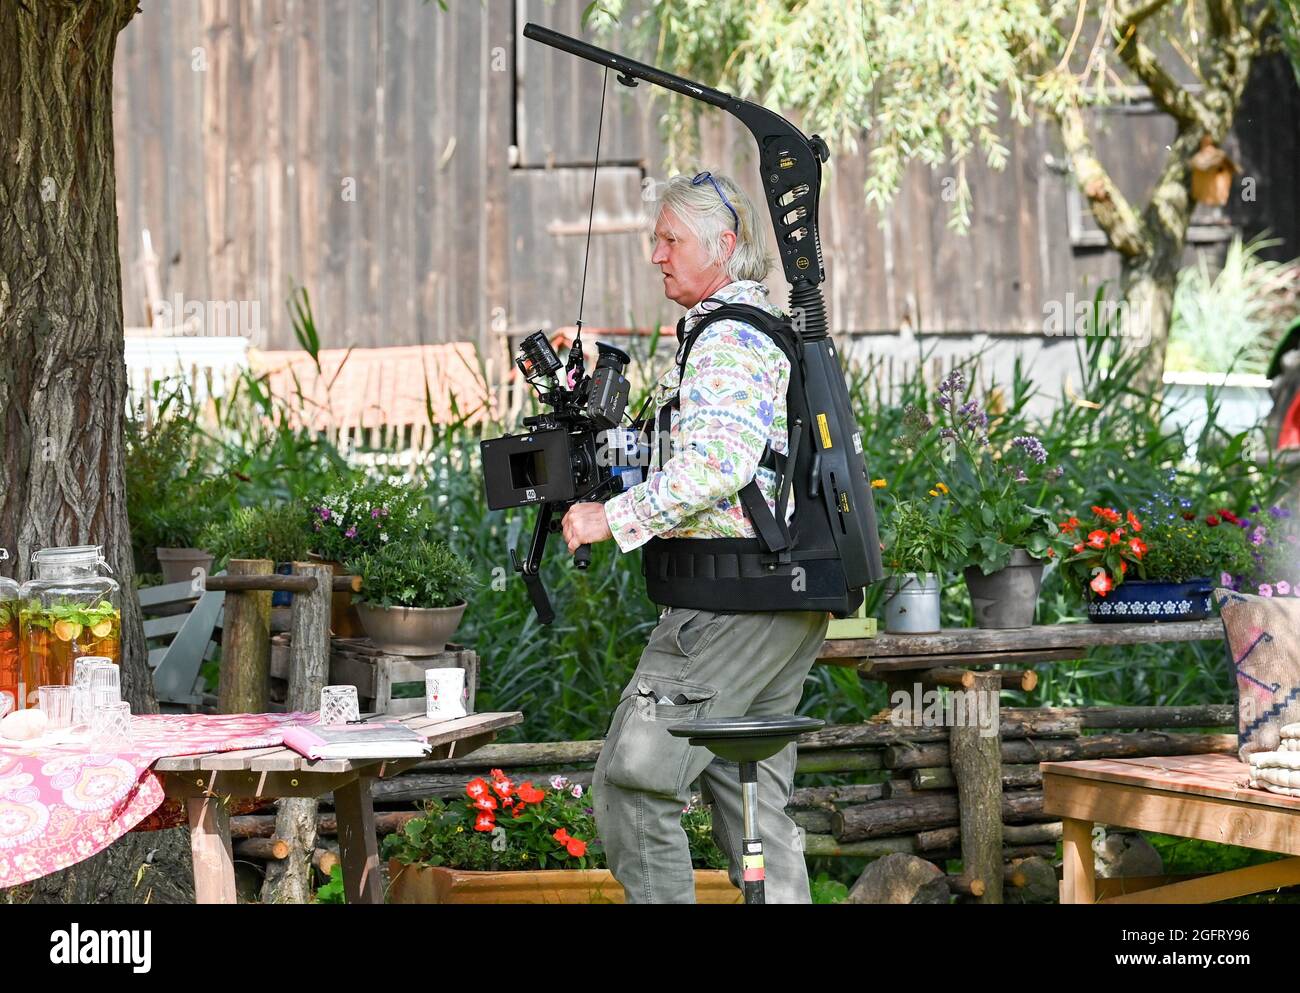 Berlin, Germany. 16th Aug, 2021. Director Detlef Buck strapped on a film camera during filming of 'Bibi & Tina - Einfach Anders' at Martinshof and shot a scene himself. Shooting of the new feature film directed by Detlev Buck began at the end of July. Filming is taking place in Berlin, Brandenburg and Saxony-Anhalt. Credit: Jens Kalaene/dpa-Zentralbild/dpa/Alamy Live News Stock Photo